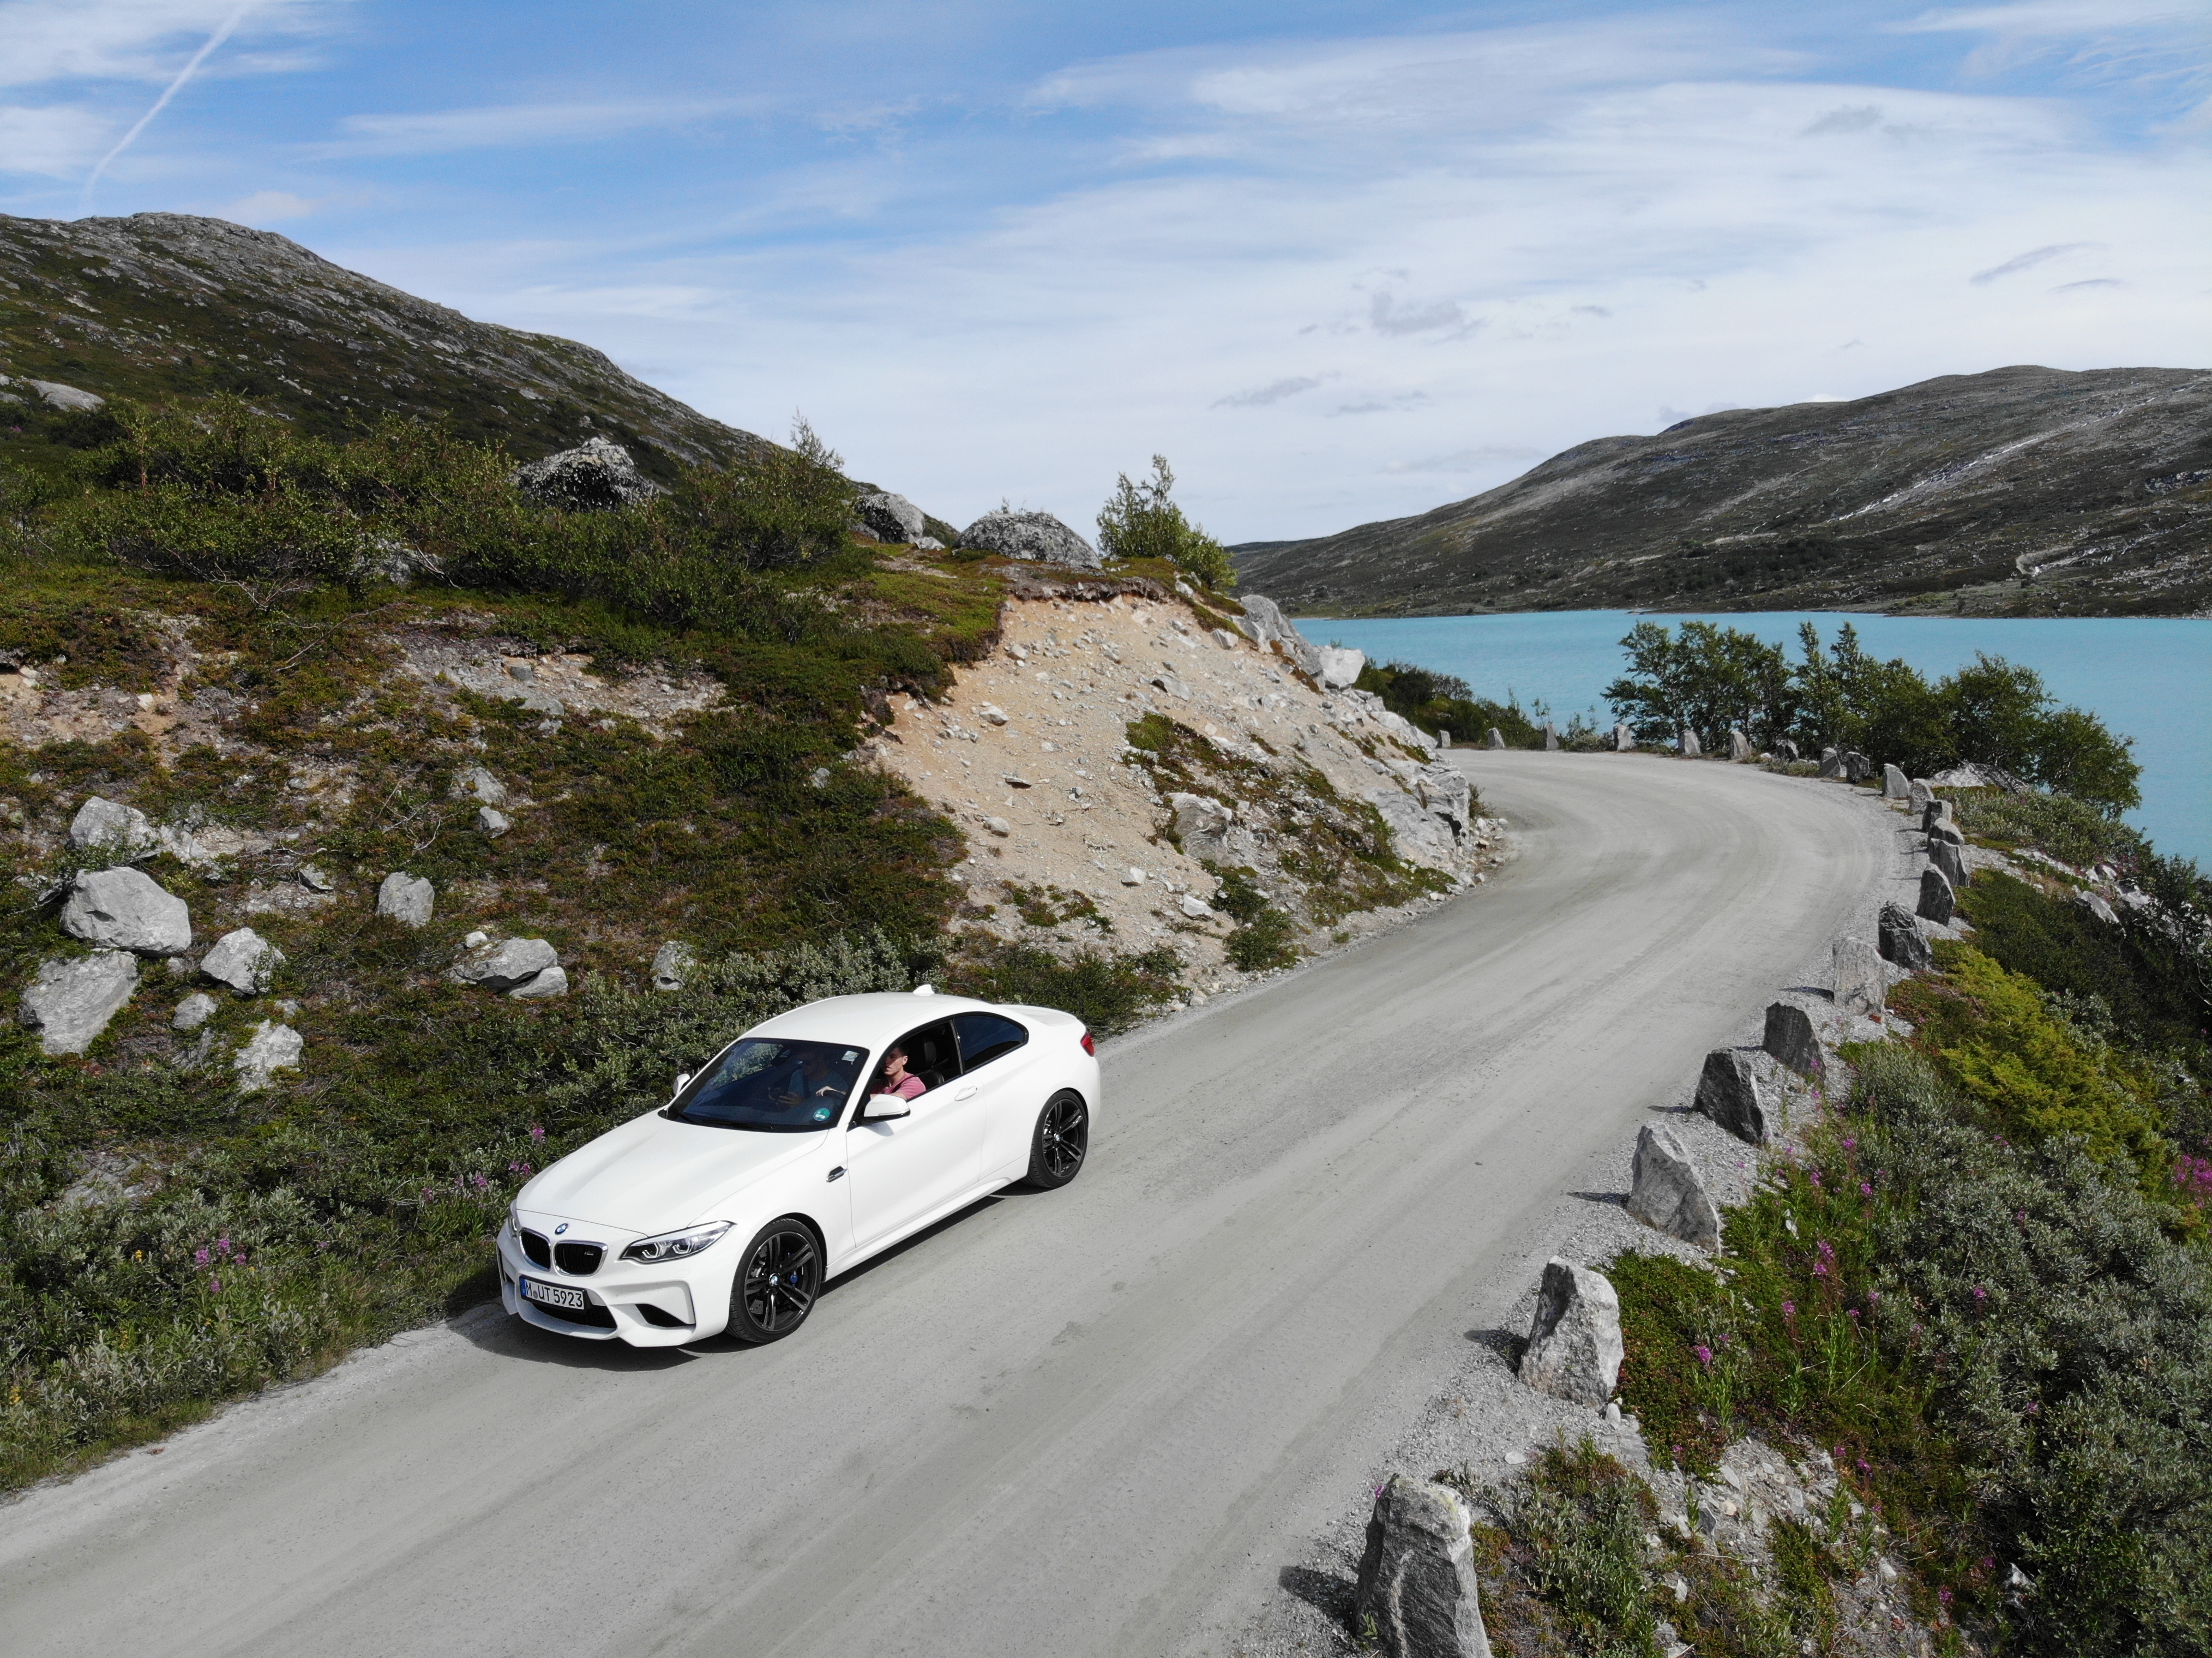 Norway Road Trip in pictures